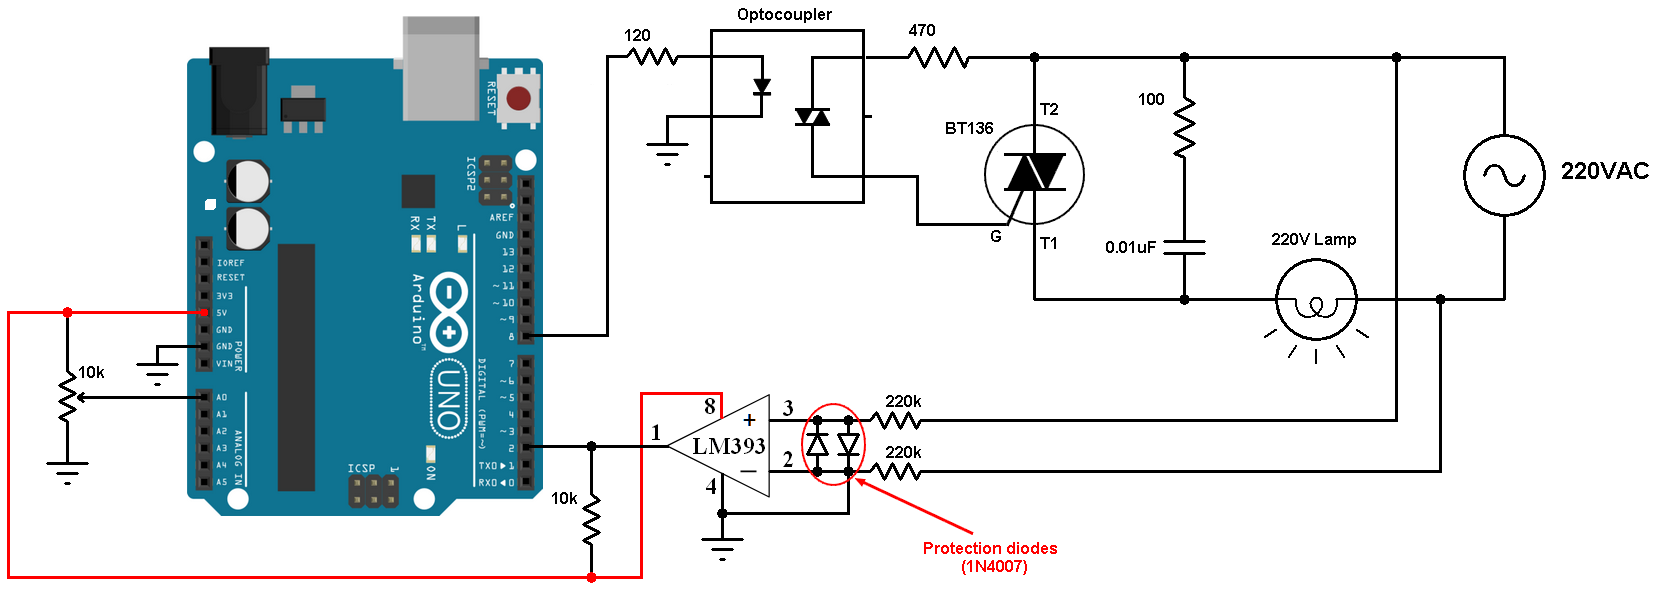 Reproduce Perfect Counsel 220V Light dimmer with Arduino - Lamp brightness control